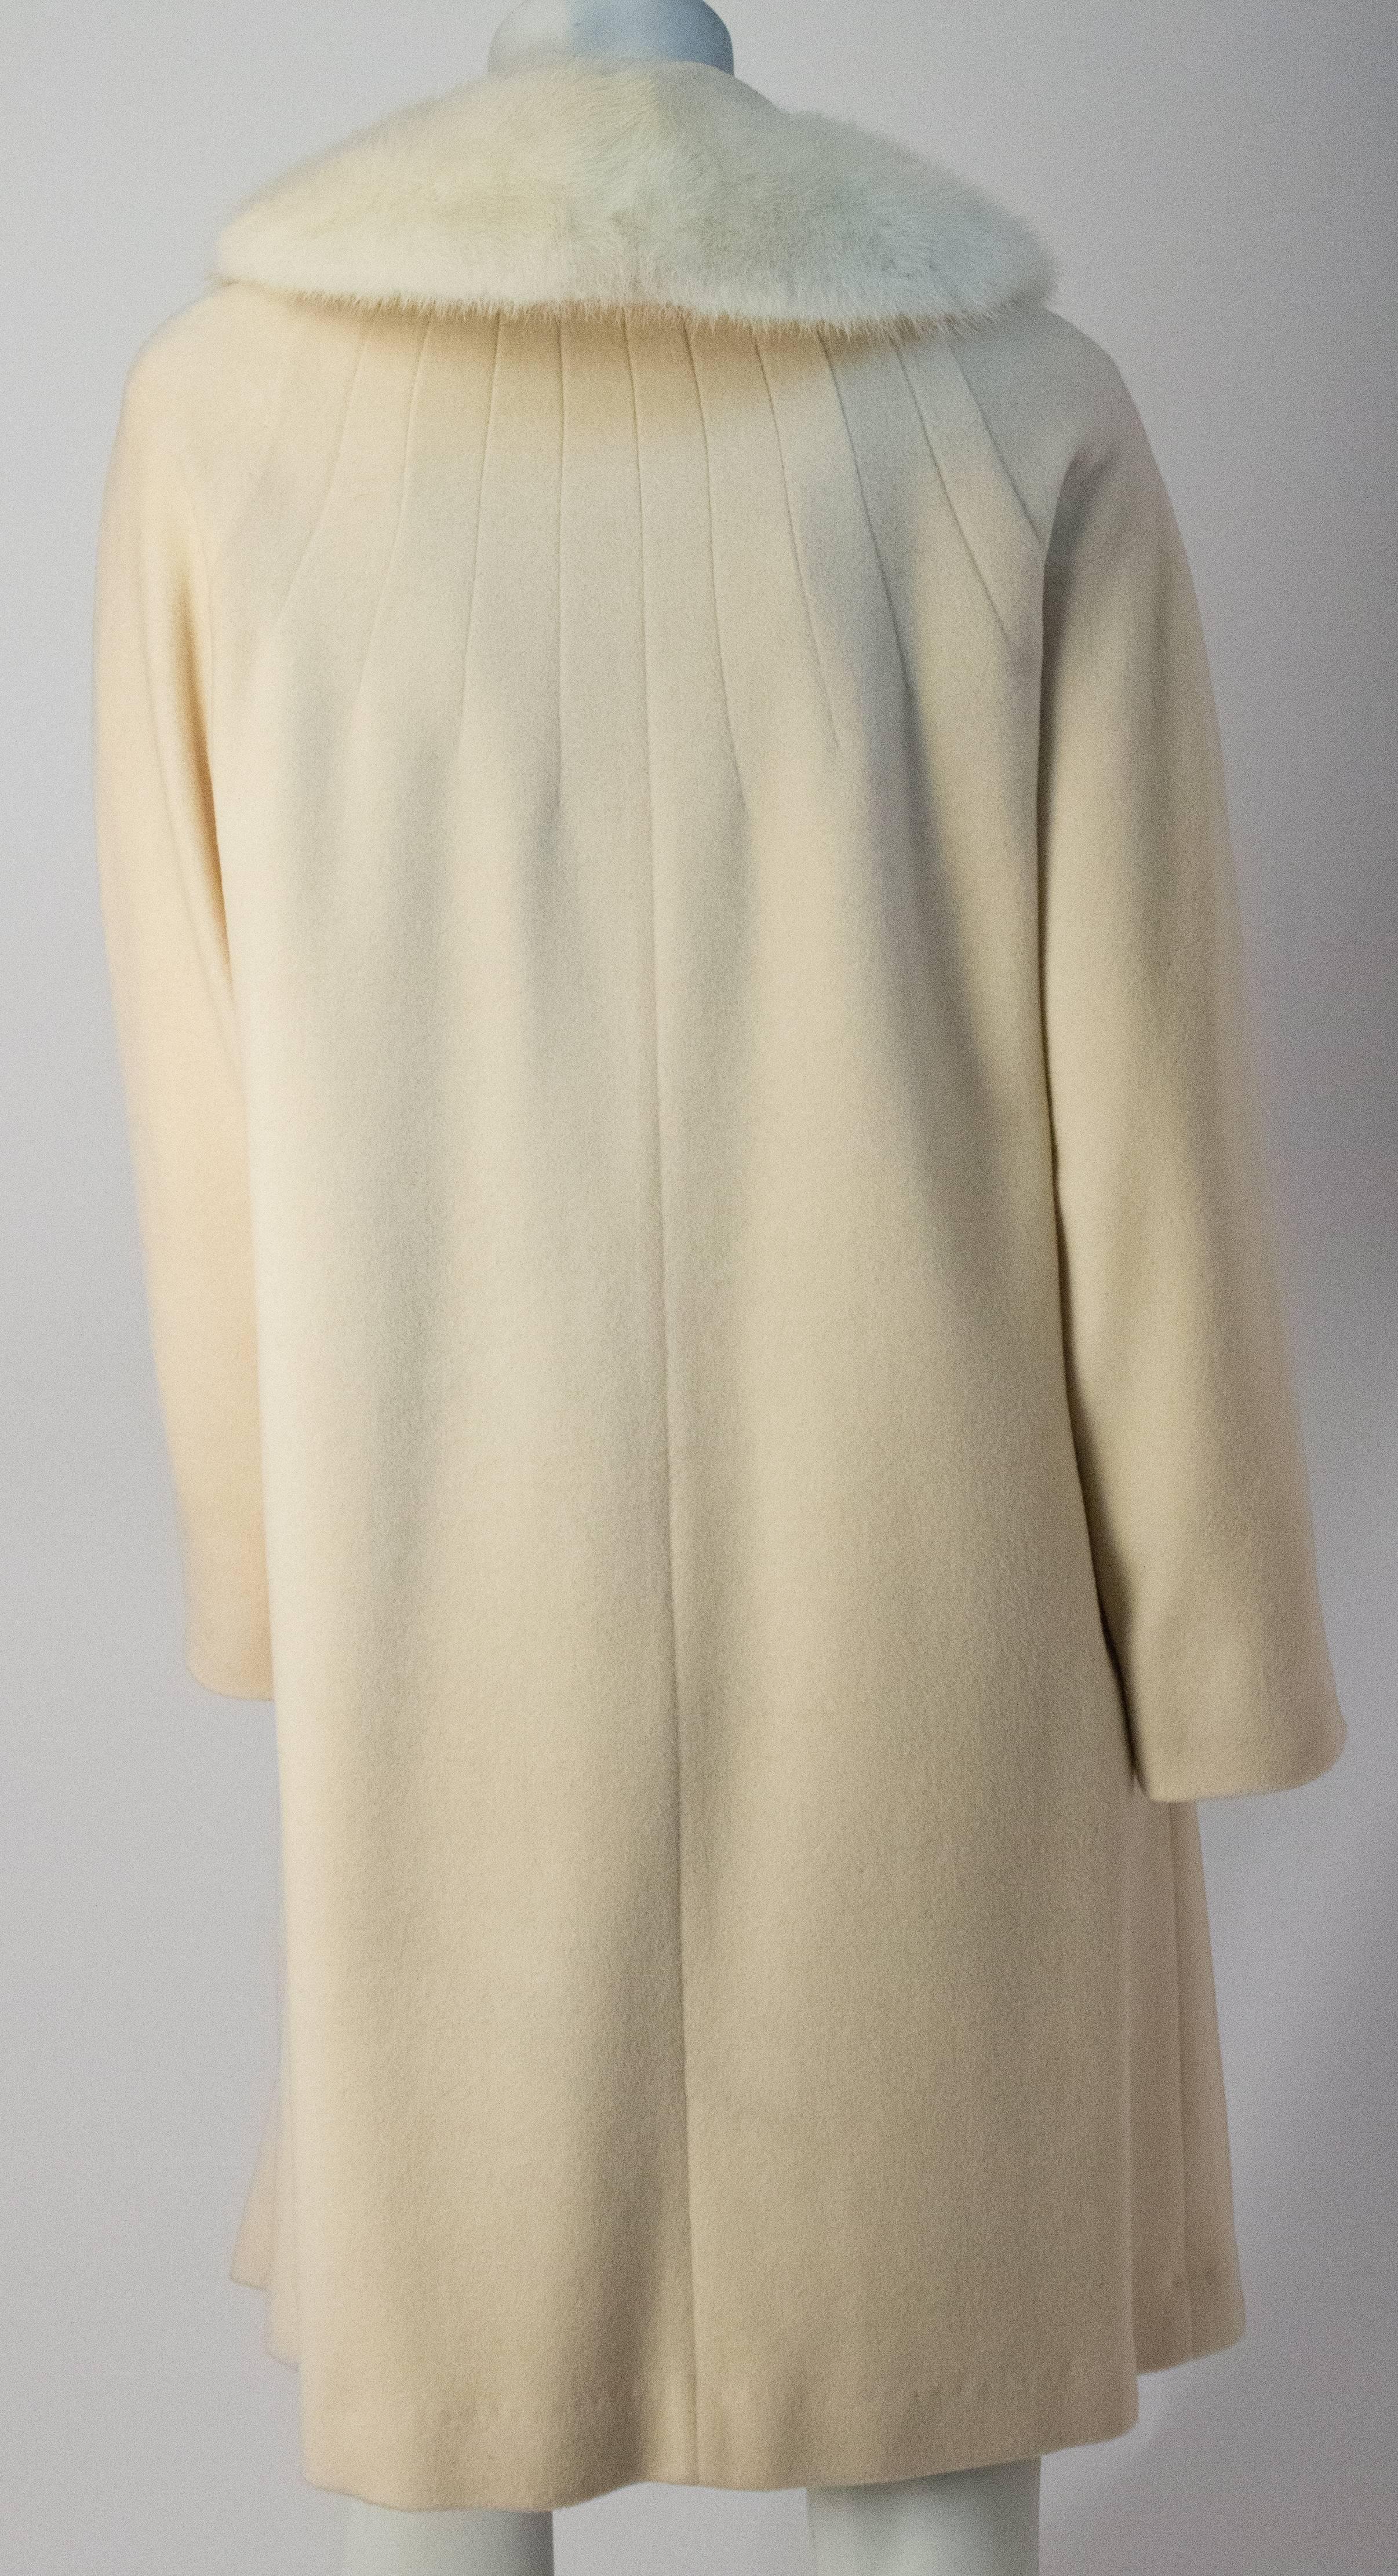 60s Cream Cashmere Coat with Mink Collar. Silk lining. Fits anywhere approximately between US size 4-8. 